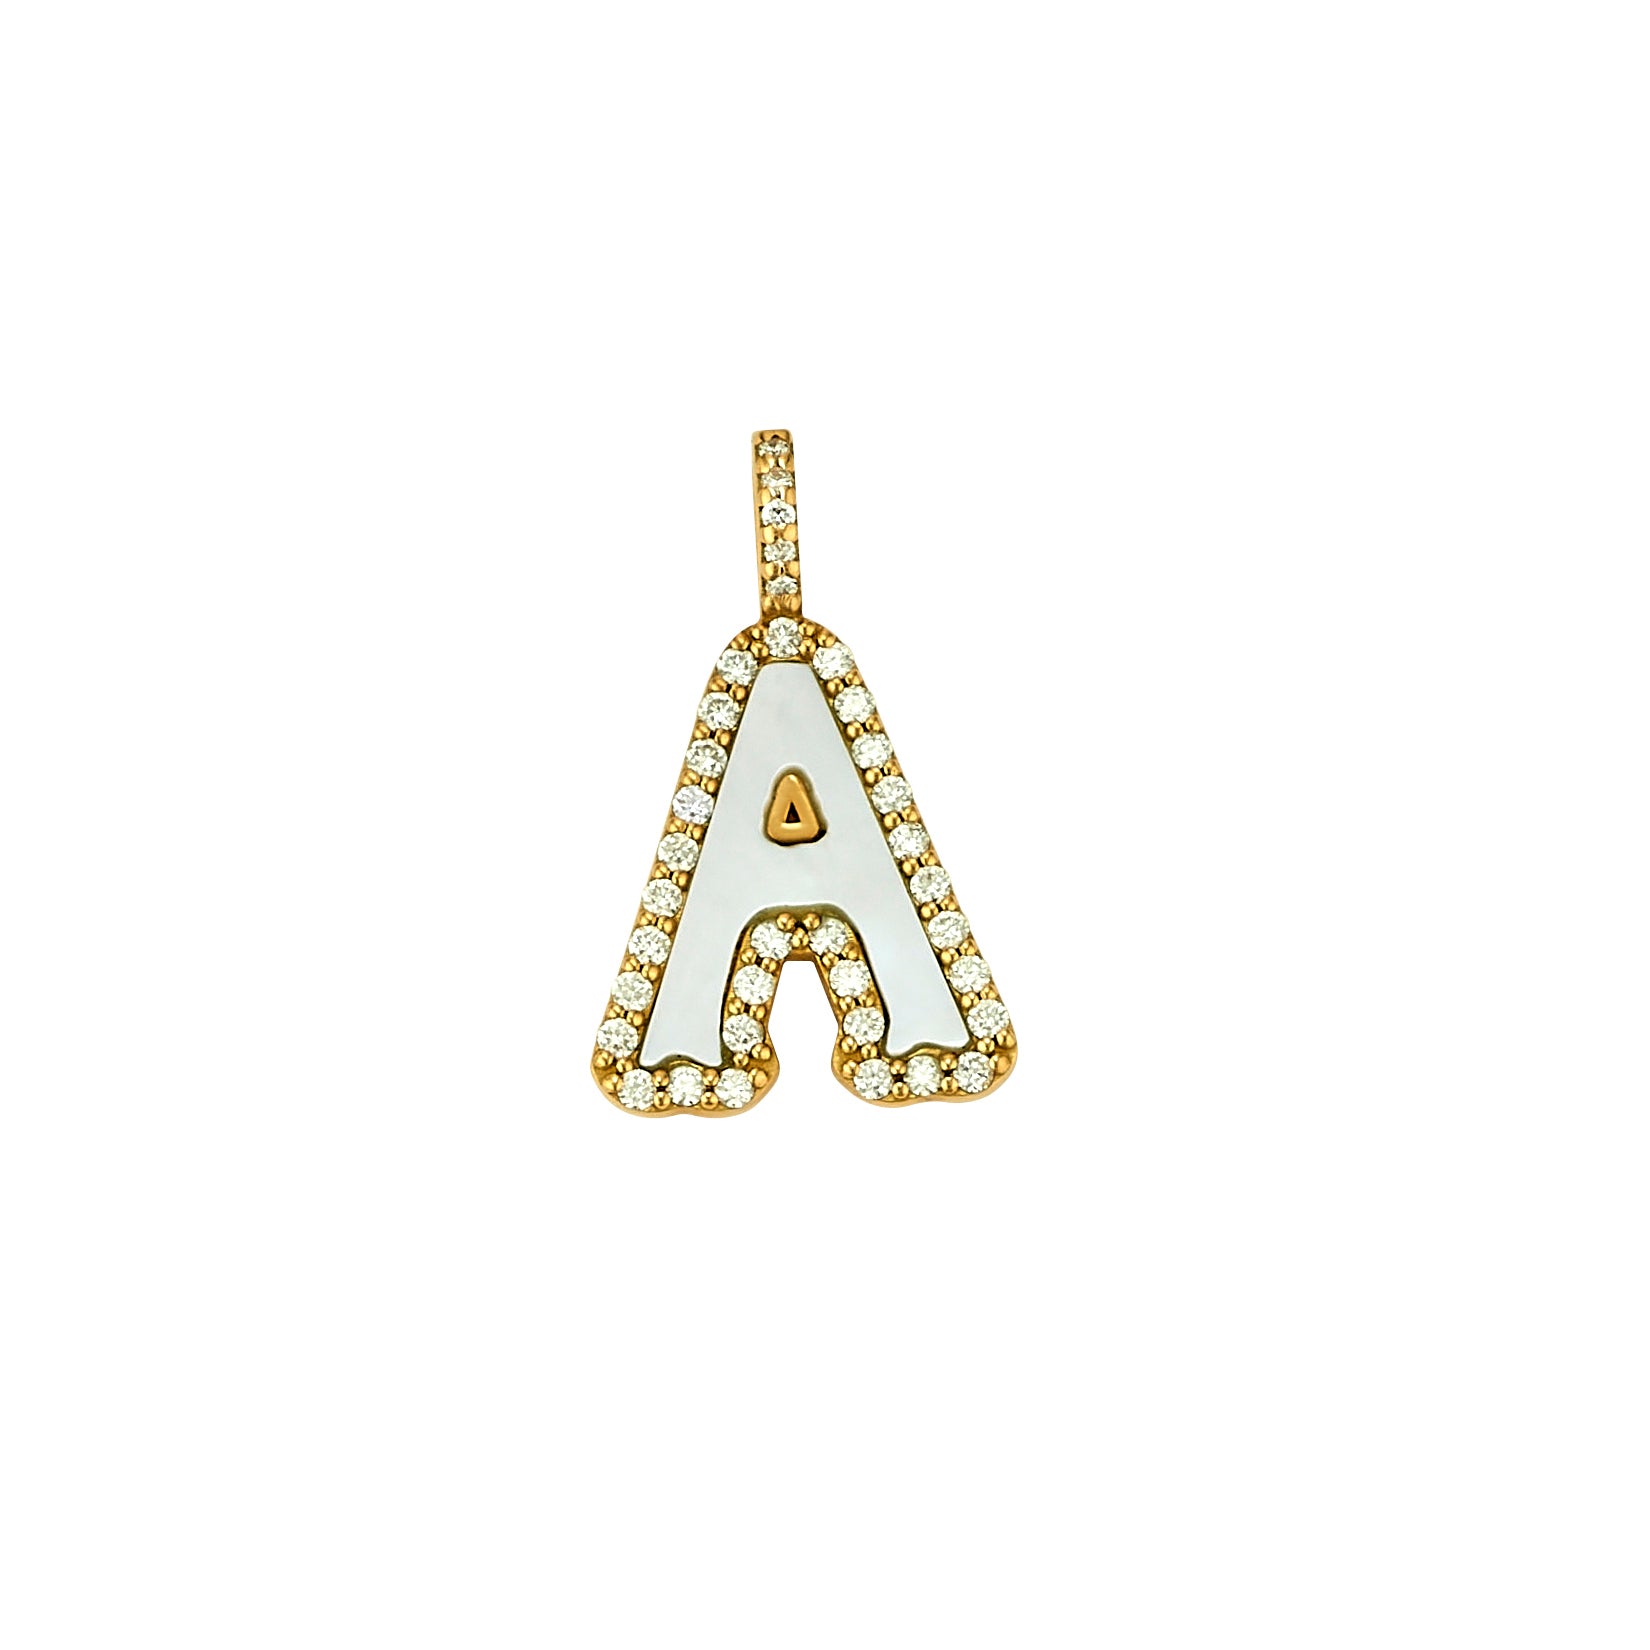 5pcs Cubic Zirconia Pave Worthy Word Charms Gold Plated Letter